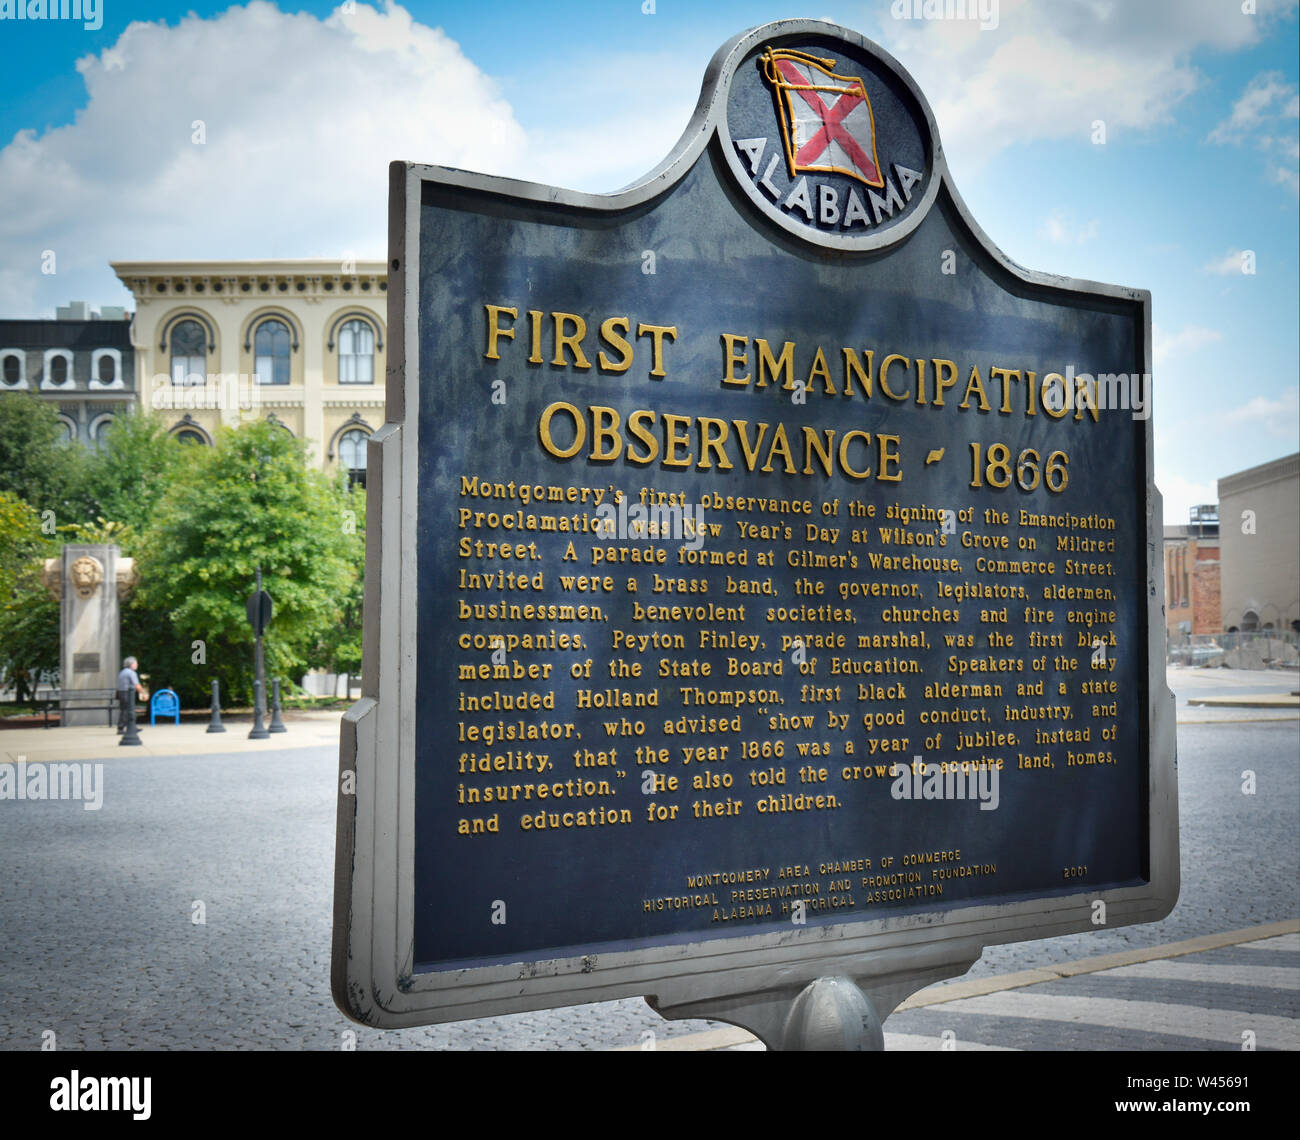 An historical marker commemorating the First Emancipation Observance of 1866 by former slaves, in Montgomery, AL, USA Stock Photo